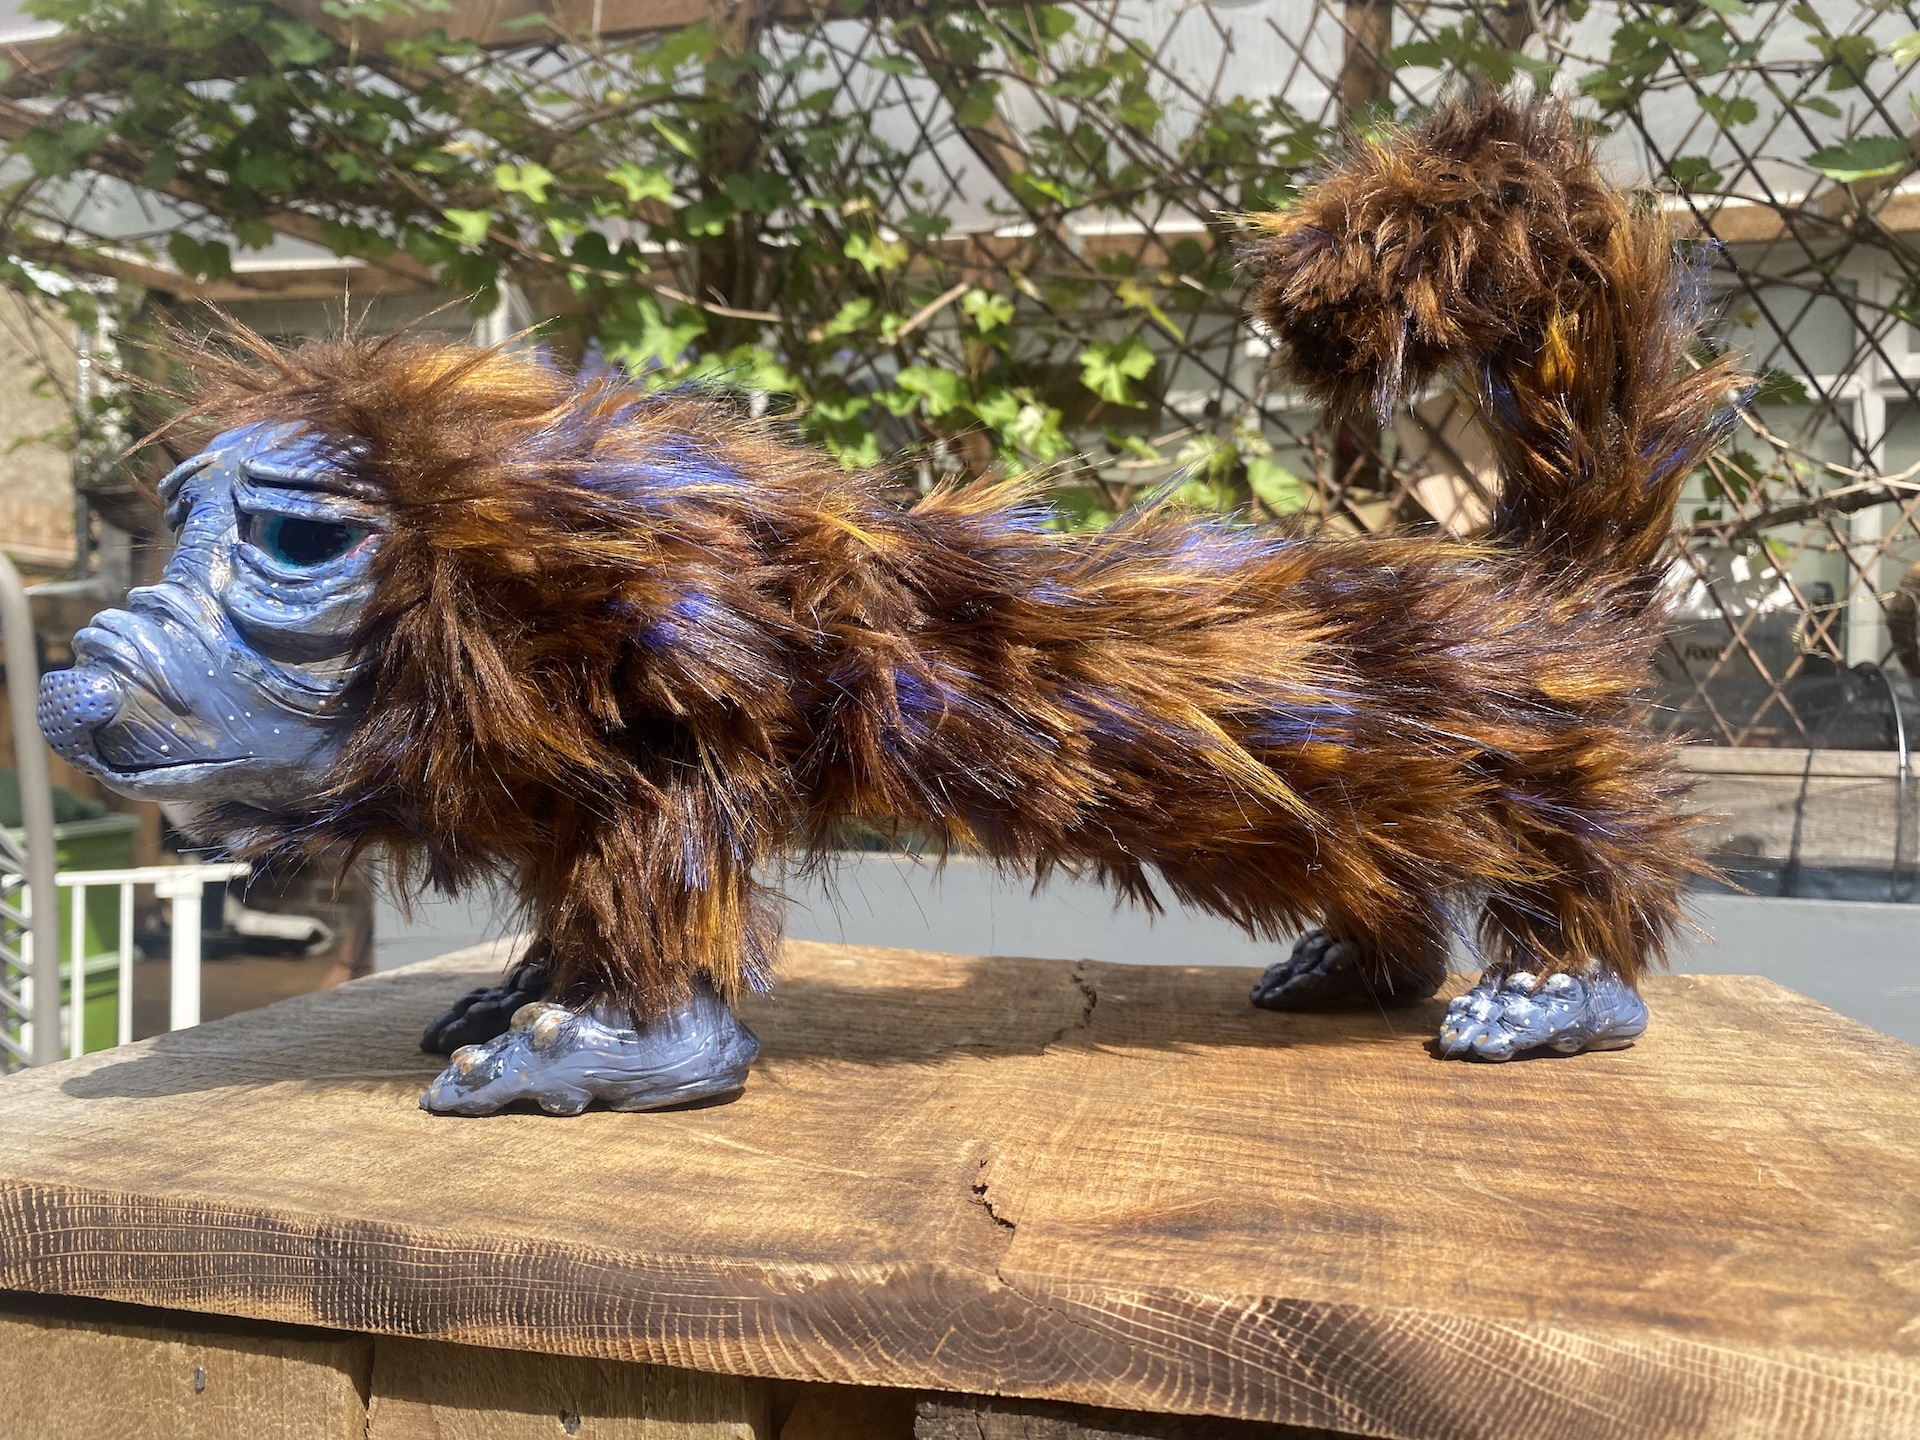 Creature creations created by Jodie Alice Hyson showing creature sculptures.